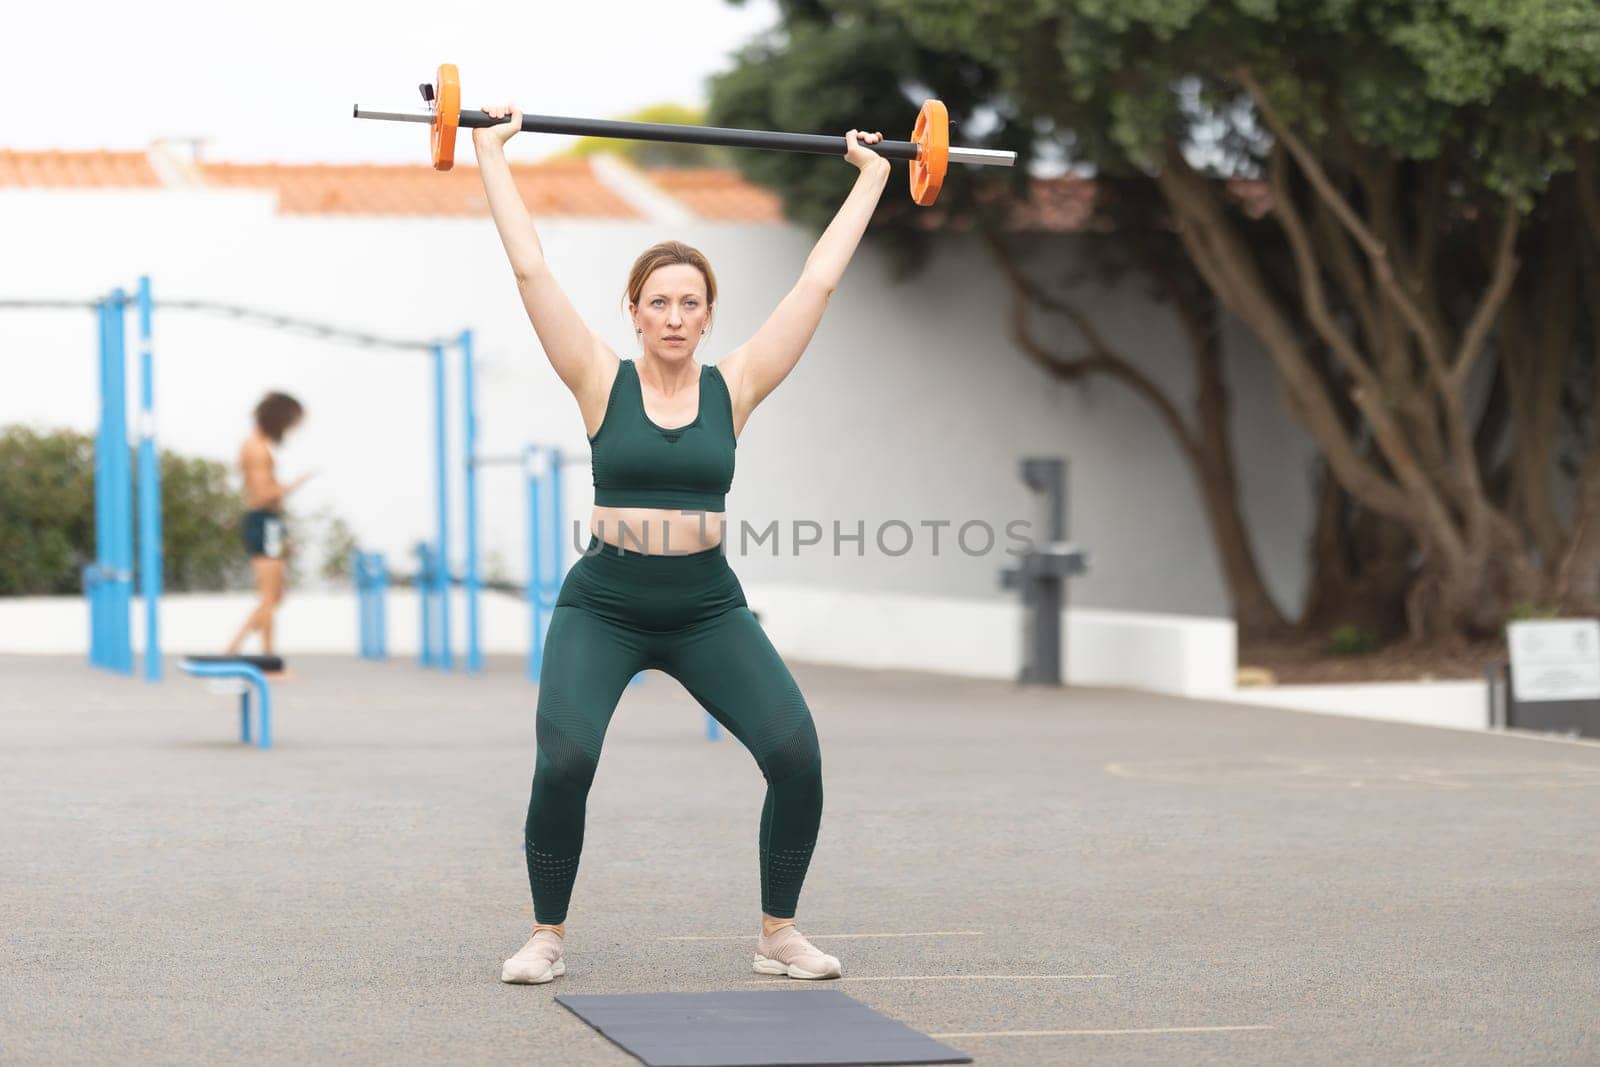 Adult sportive woman lifting a dumbbell on the outdoors sports ground by Studia72